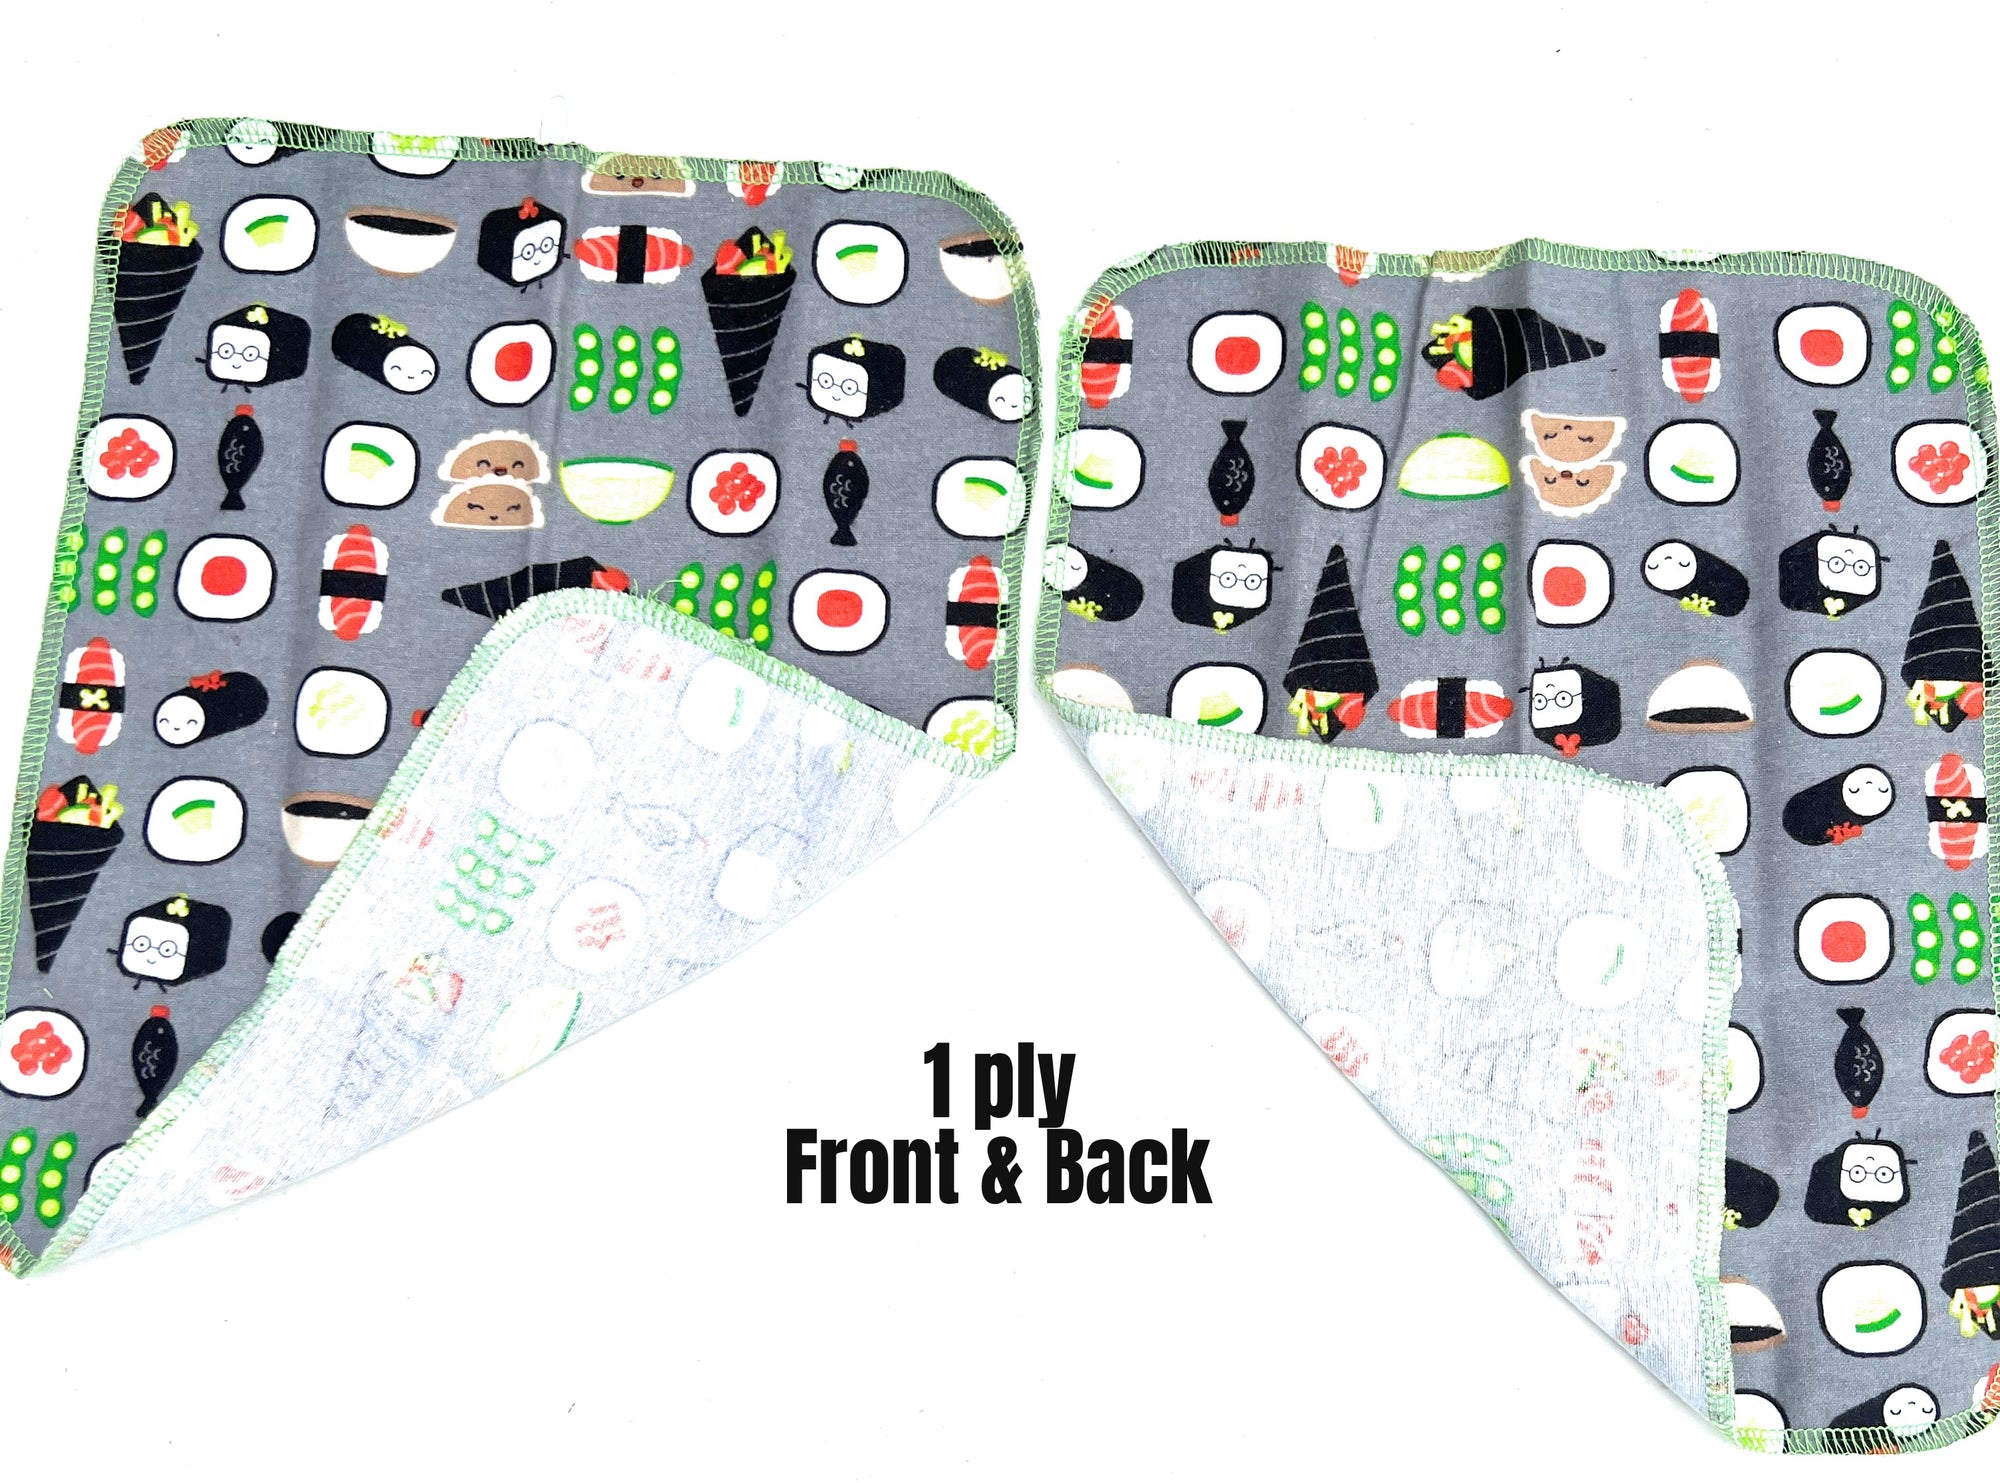 Non Paper Towels Napkins Sushi   Large 10" x 12"  in a 6 pack